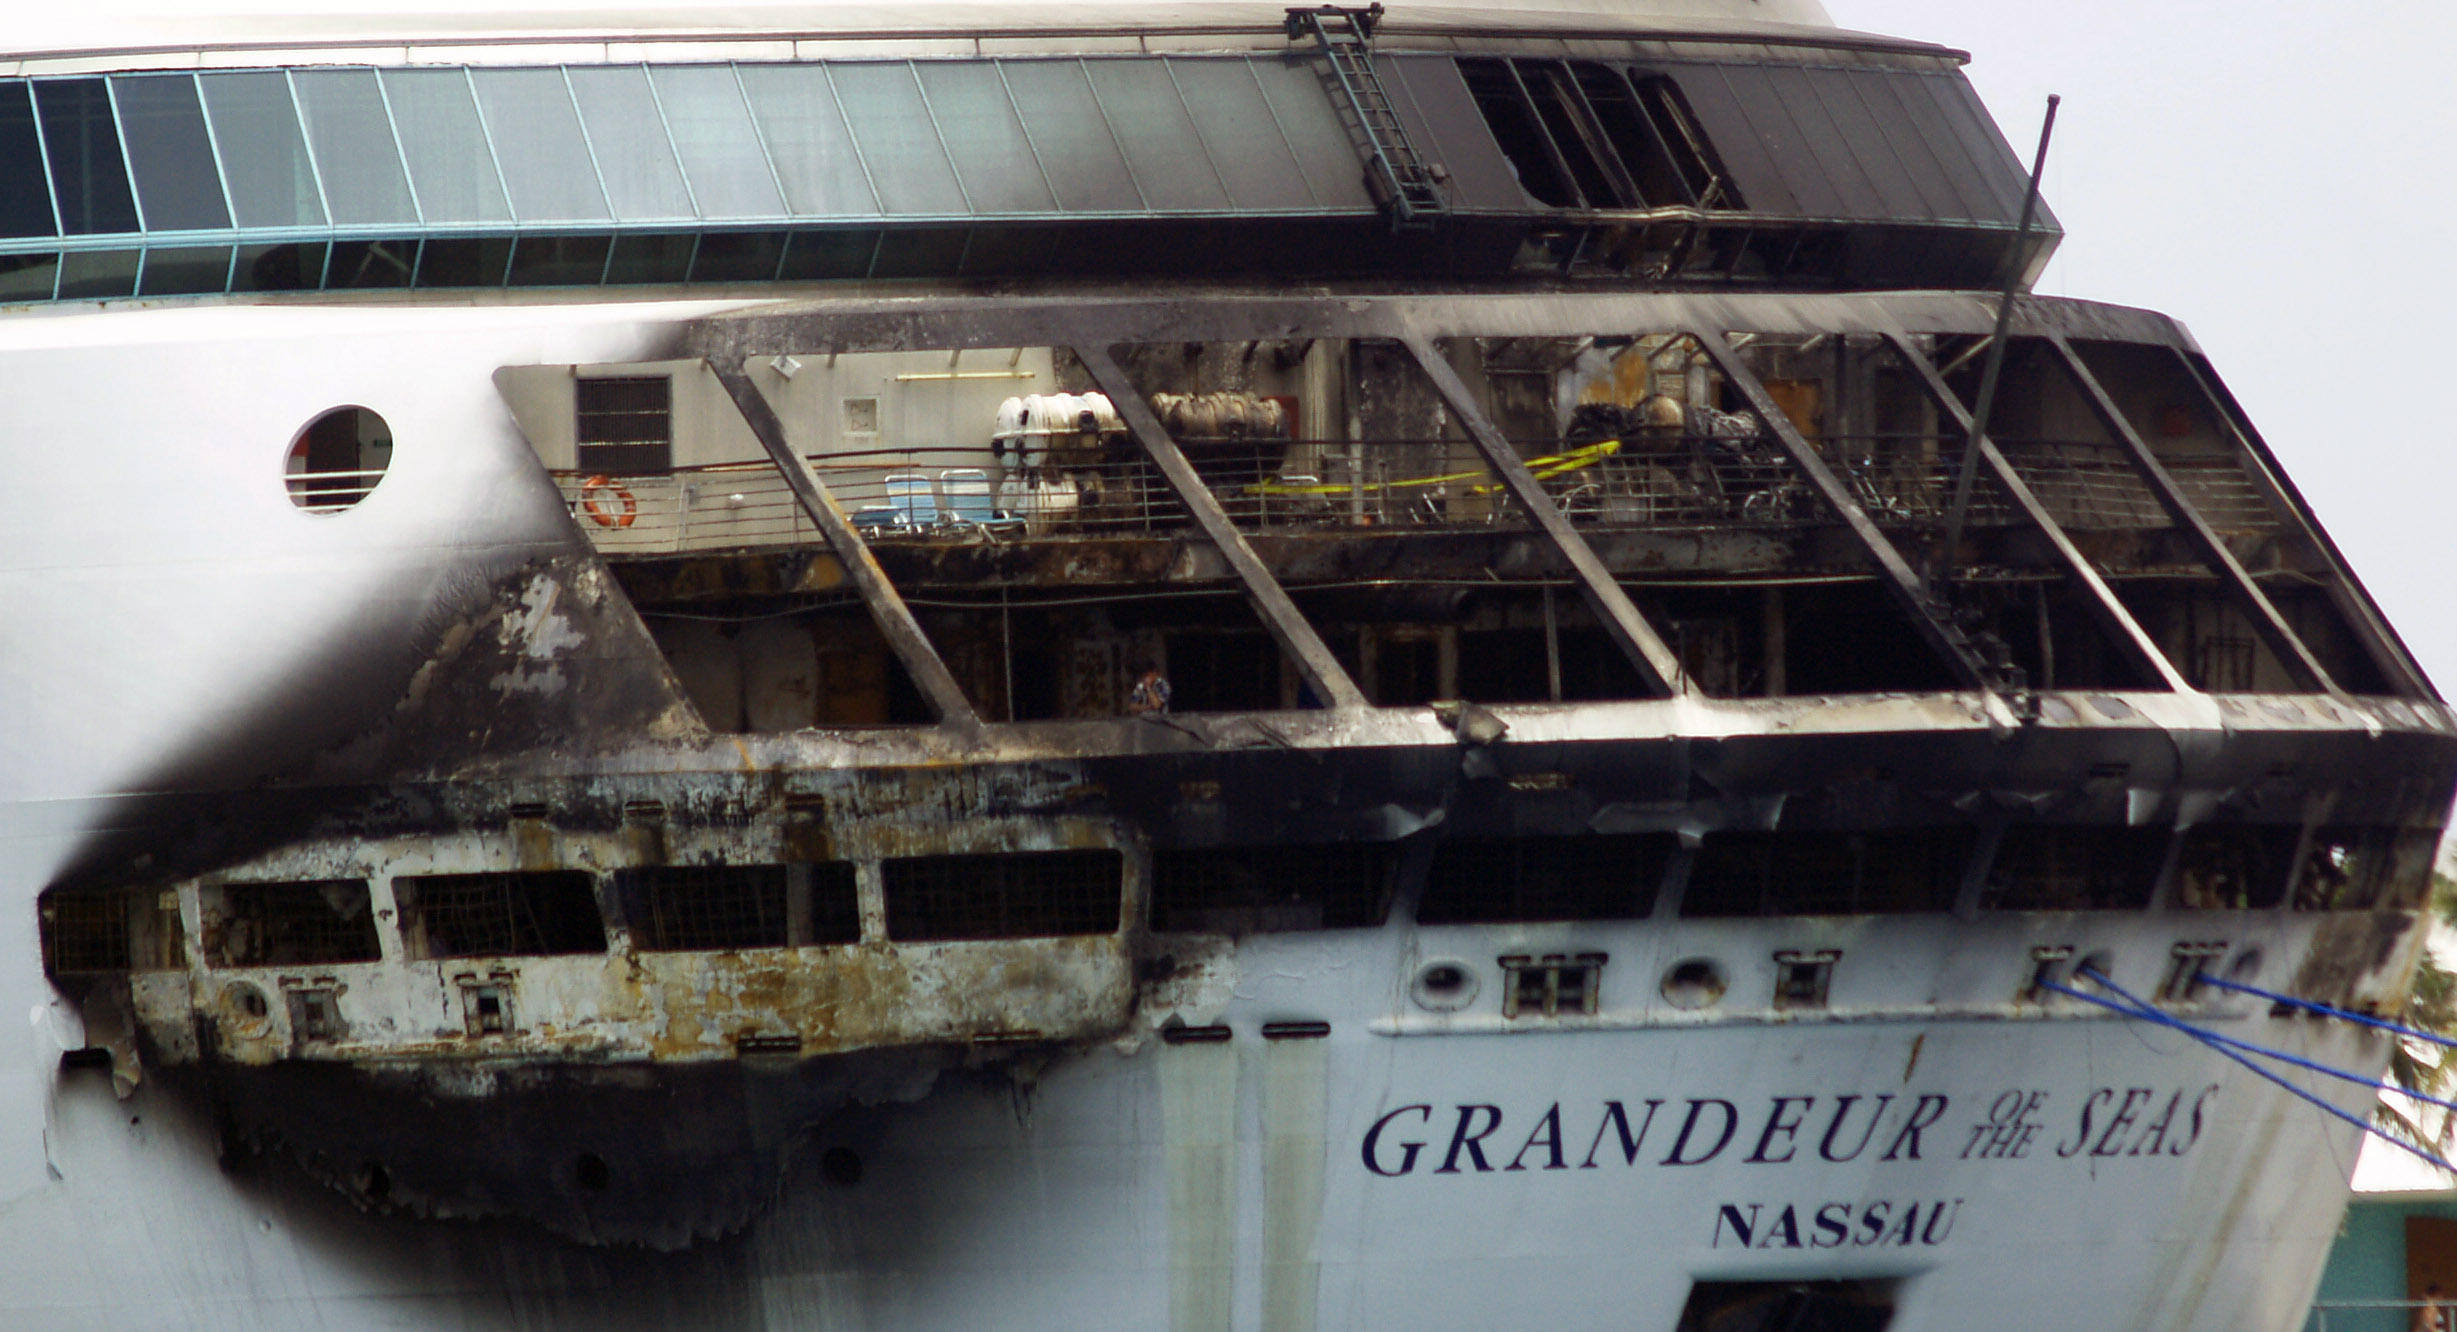 Passengers returning to U.S. after cruise ship fire The Blade